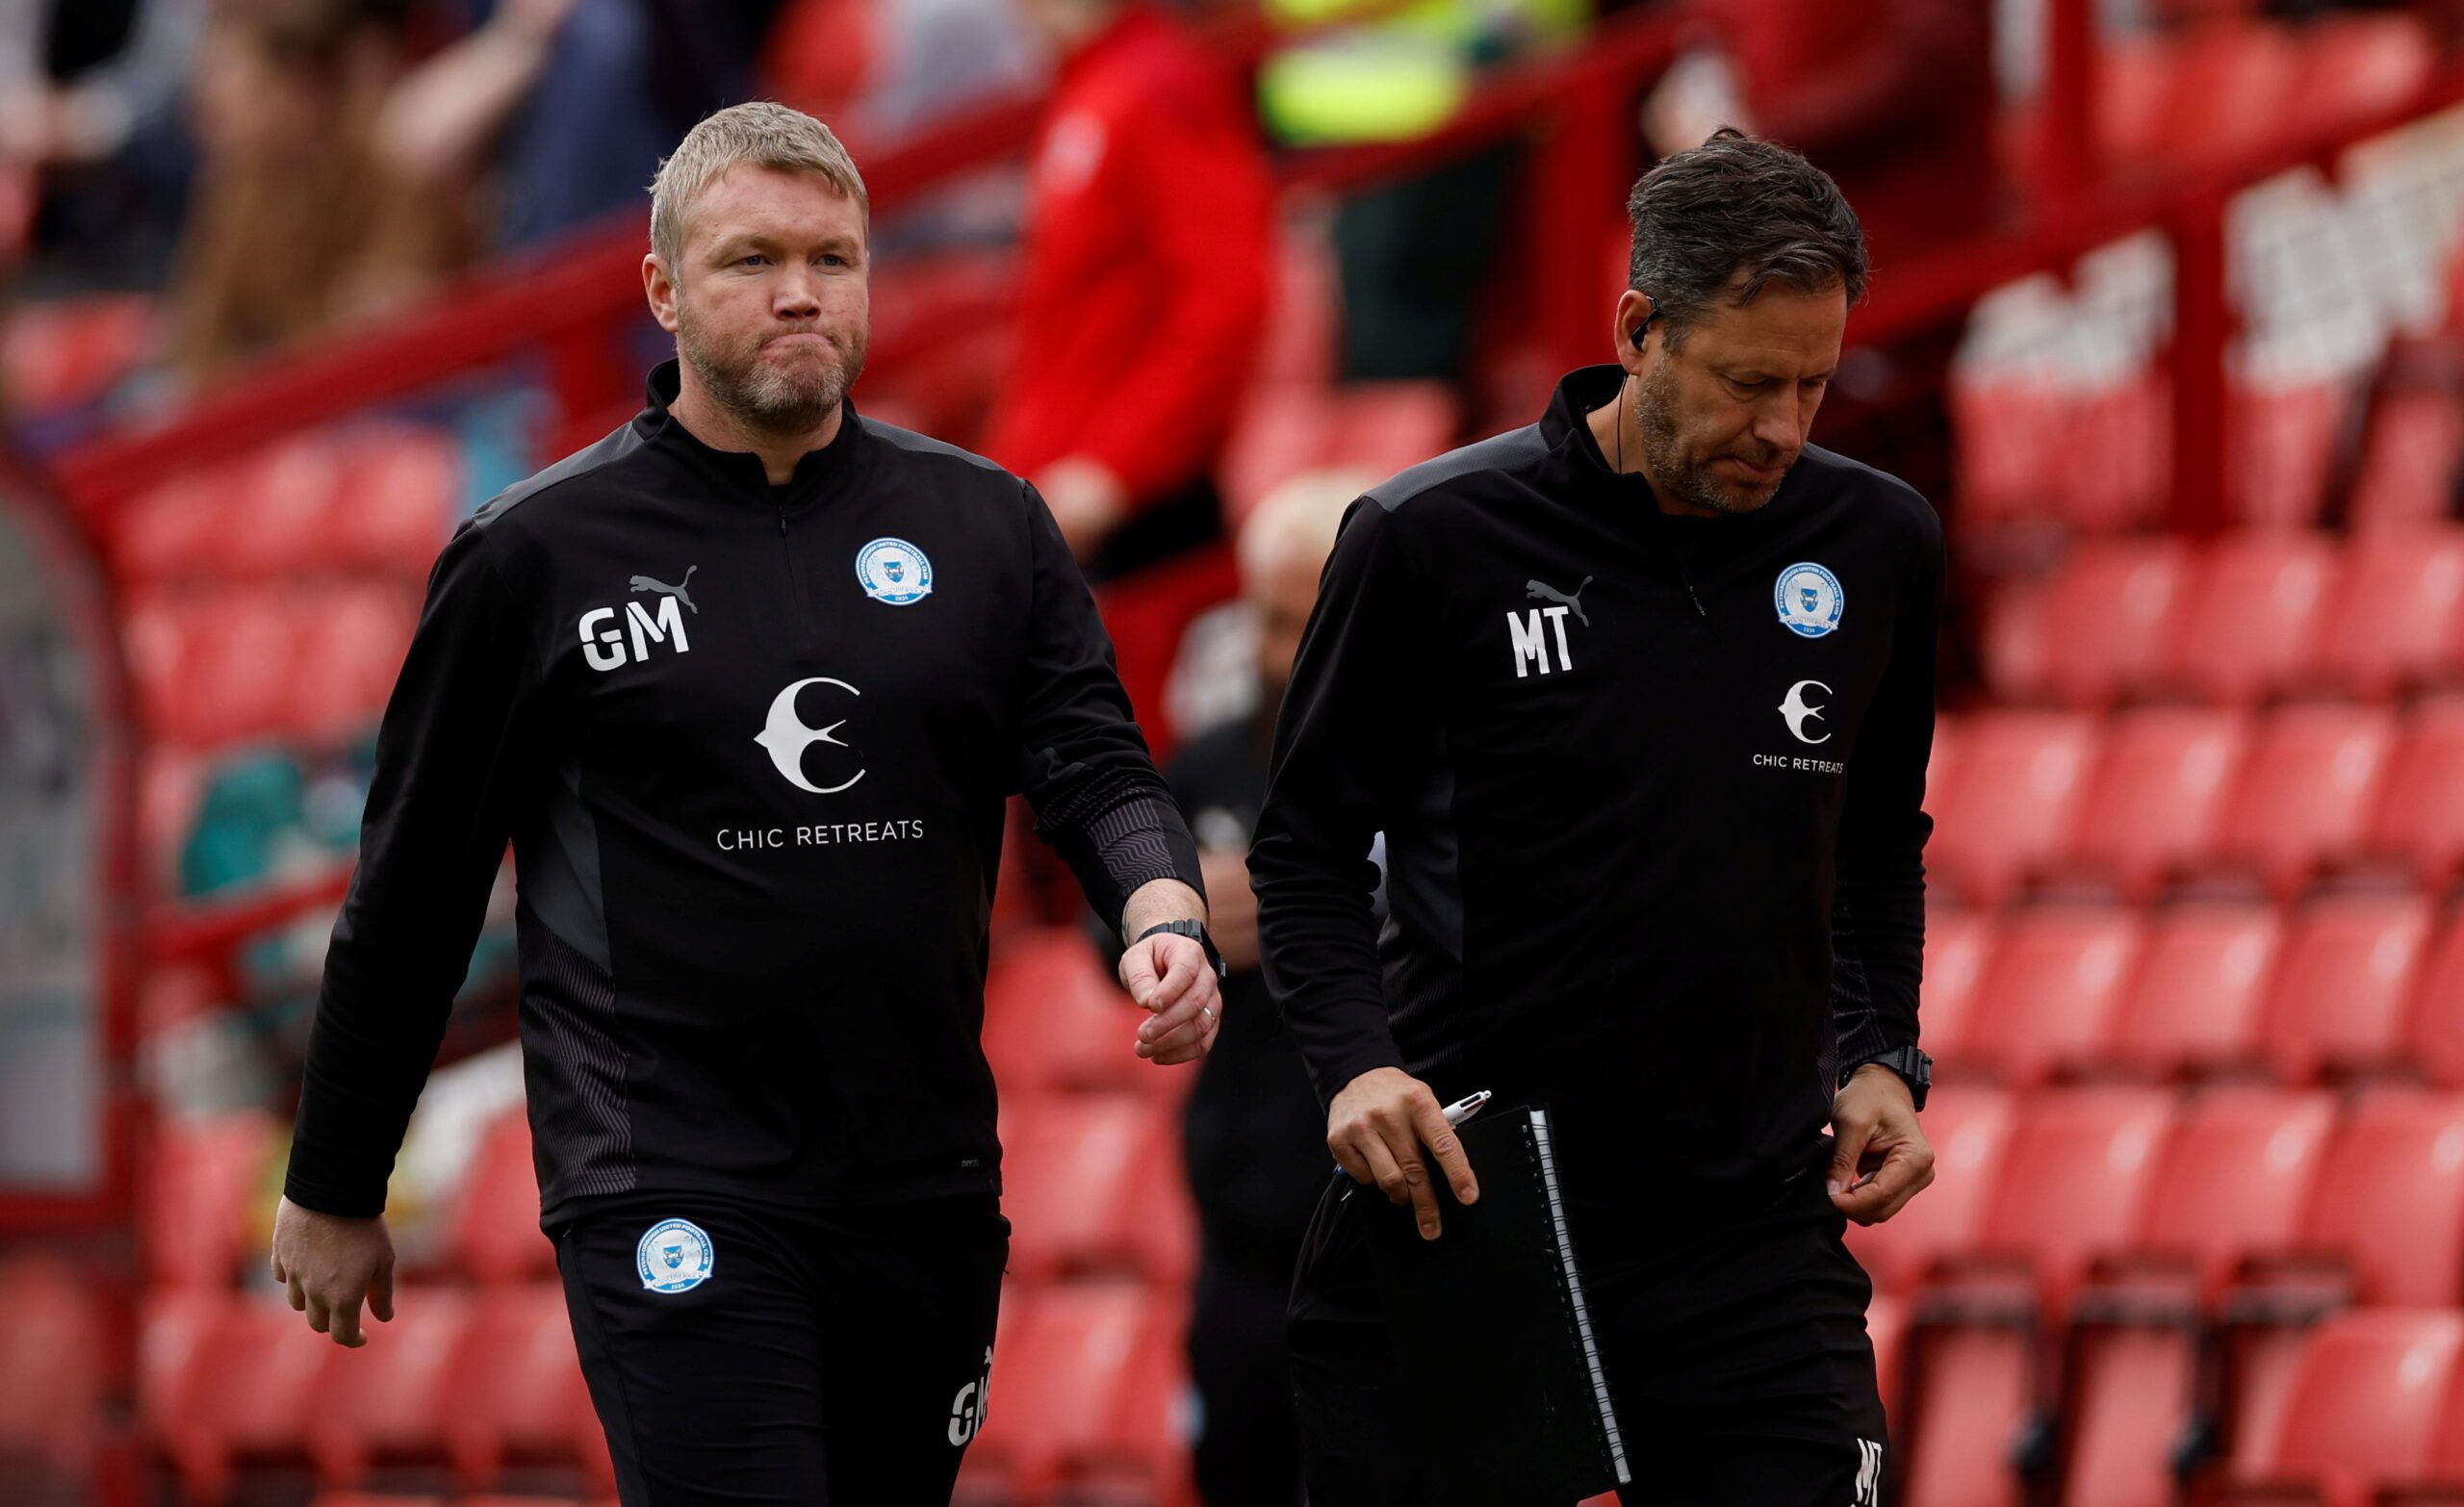 Soccer Football - Championship - Barnsley v Peterborough United - Oakwell, Barnsley, Britain - April 18, 2022 Peterborough United manager Grant McCann  Action Images/Jason Cairnduff  EDITORIAL USE ONLY. No use with unauthorized audio, video, data, fixture lists, club/league logos or 